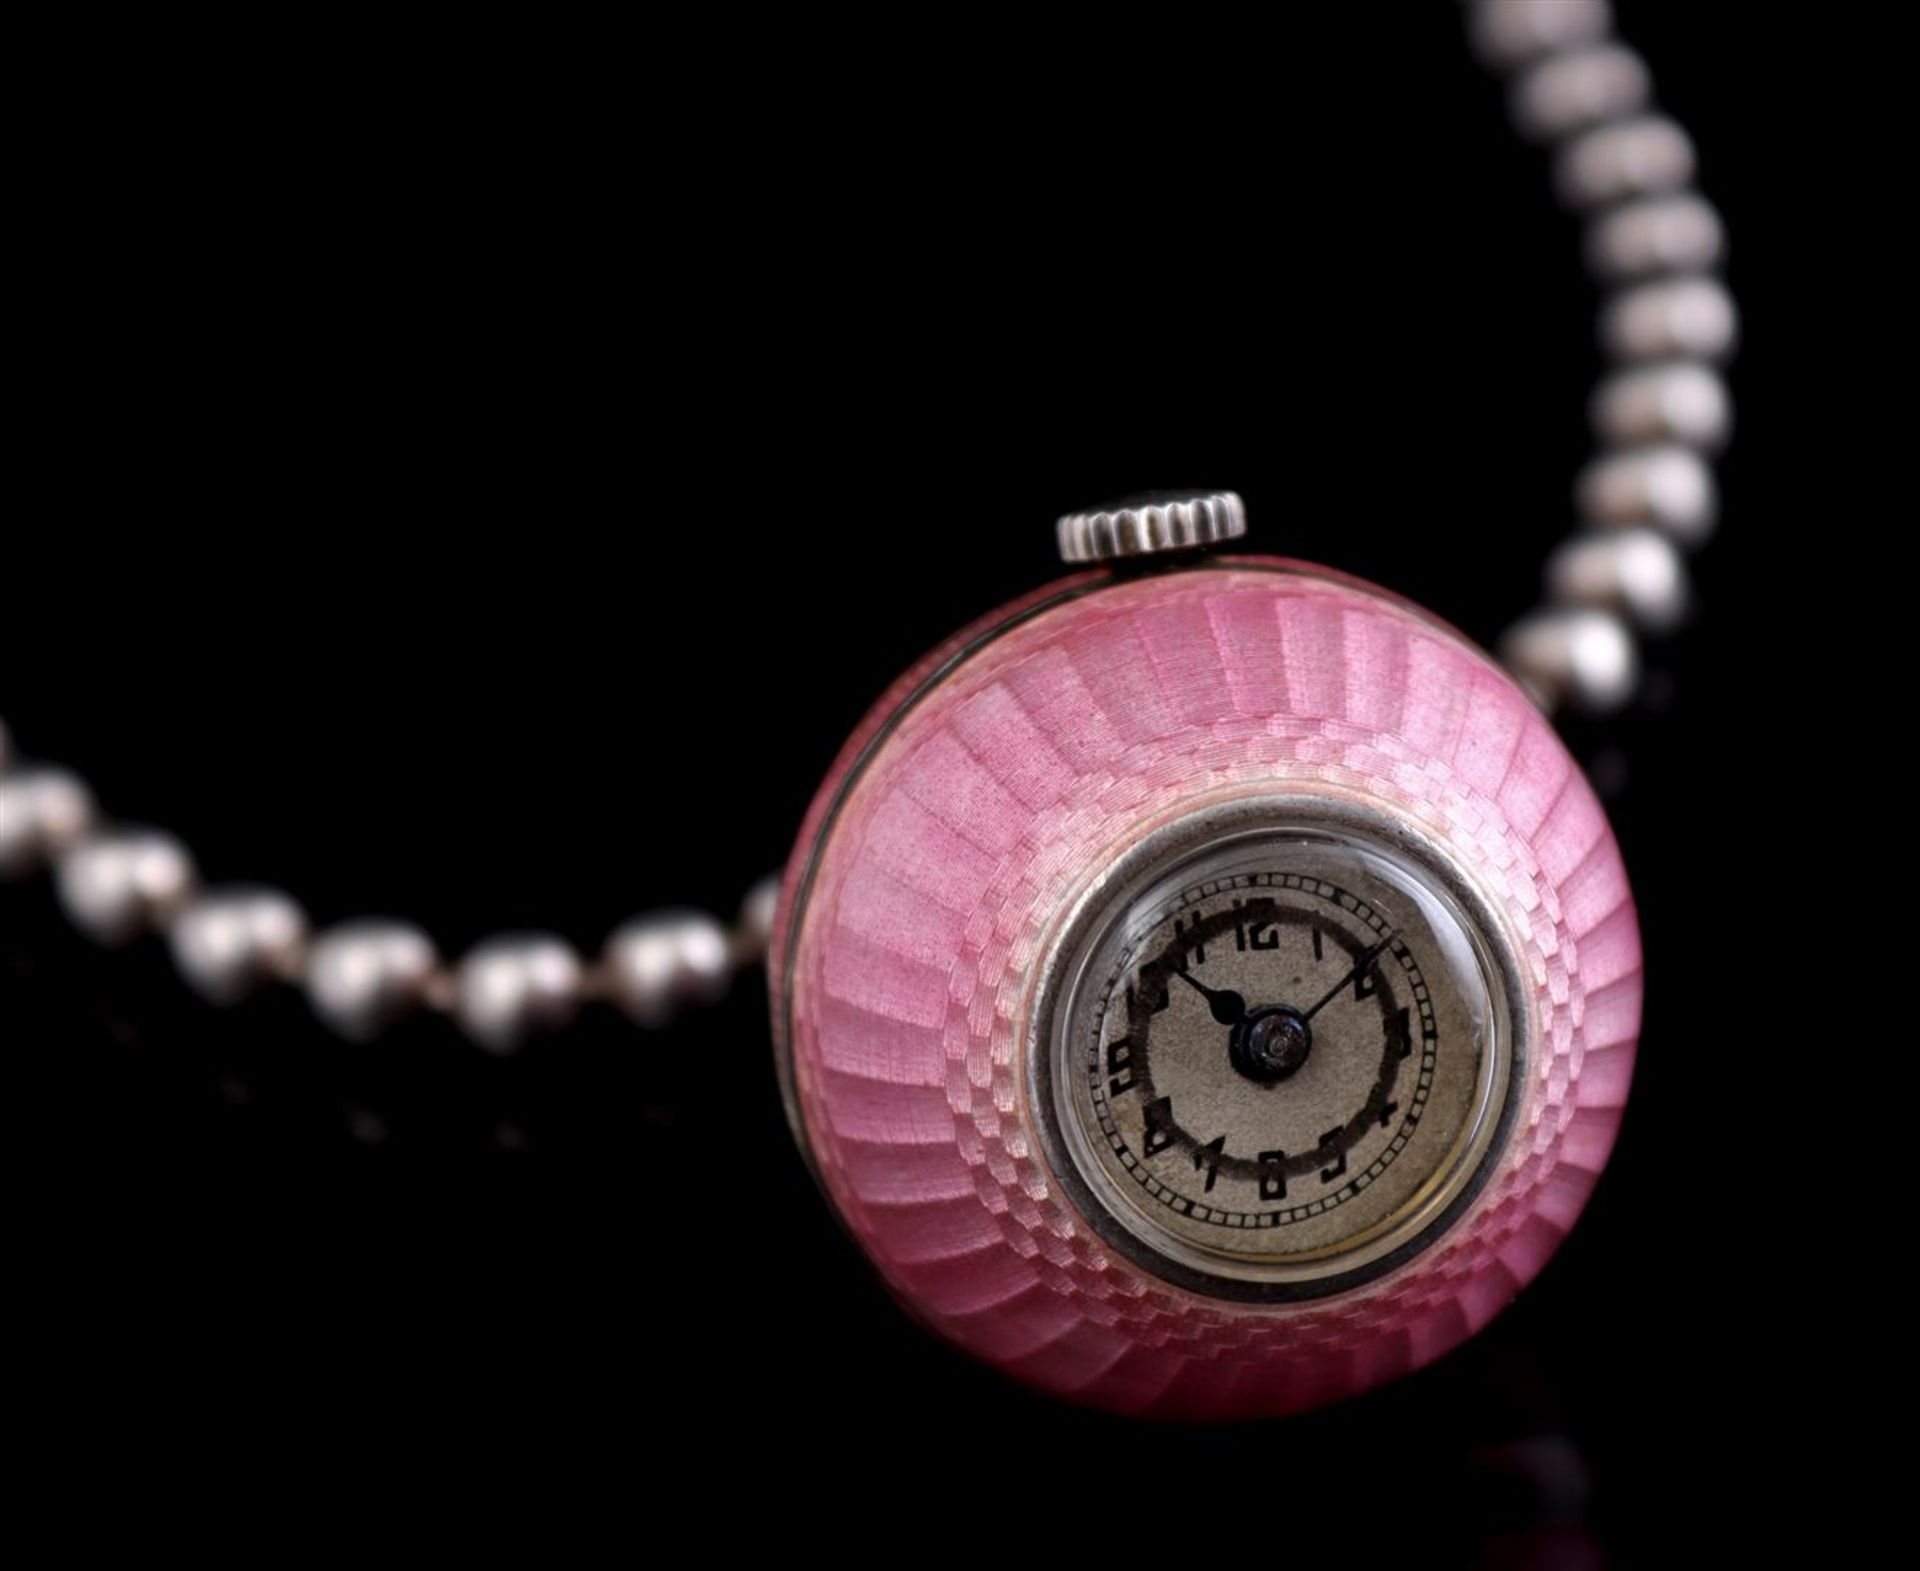 Spherical necklace watch